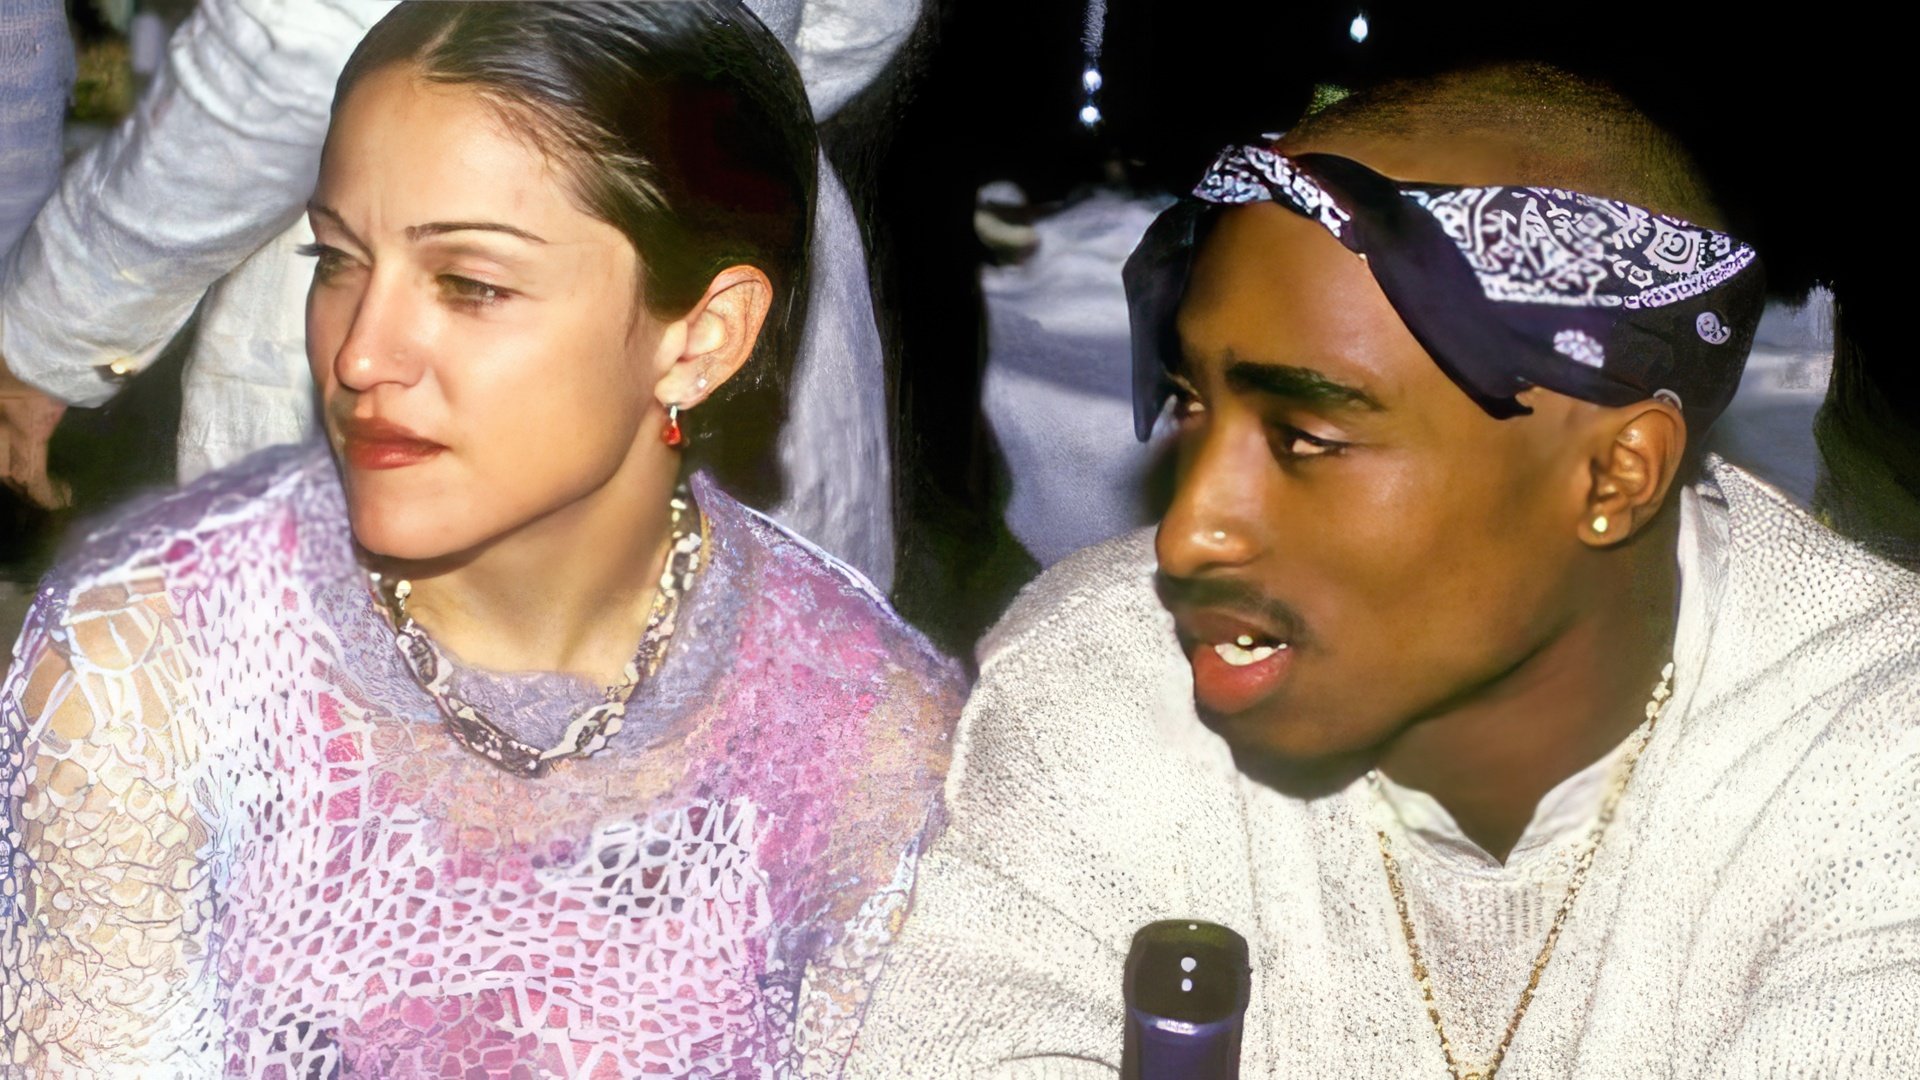 Madonna dated Tupac. In 1996, the rapper was shot dead